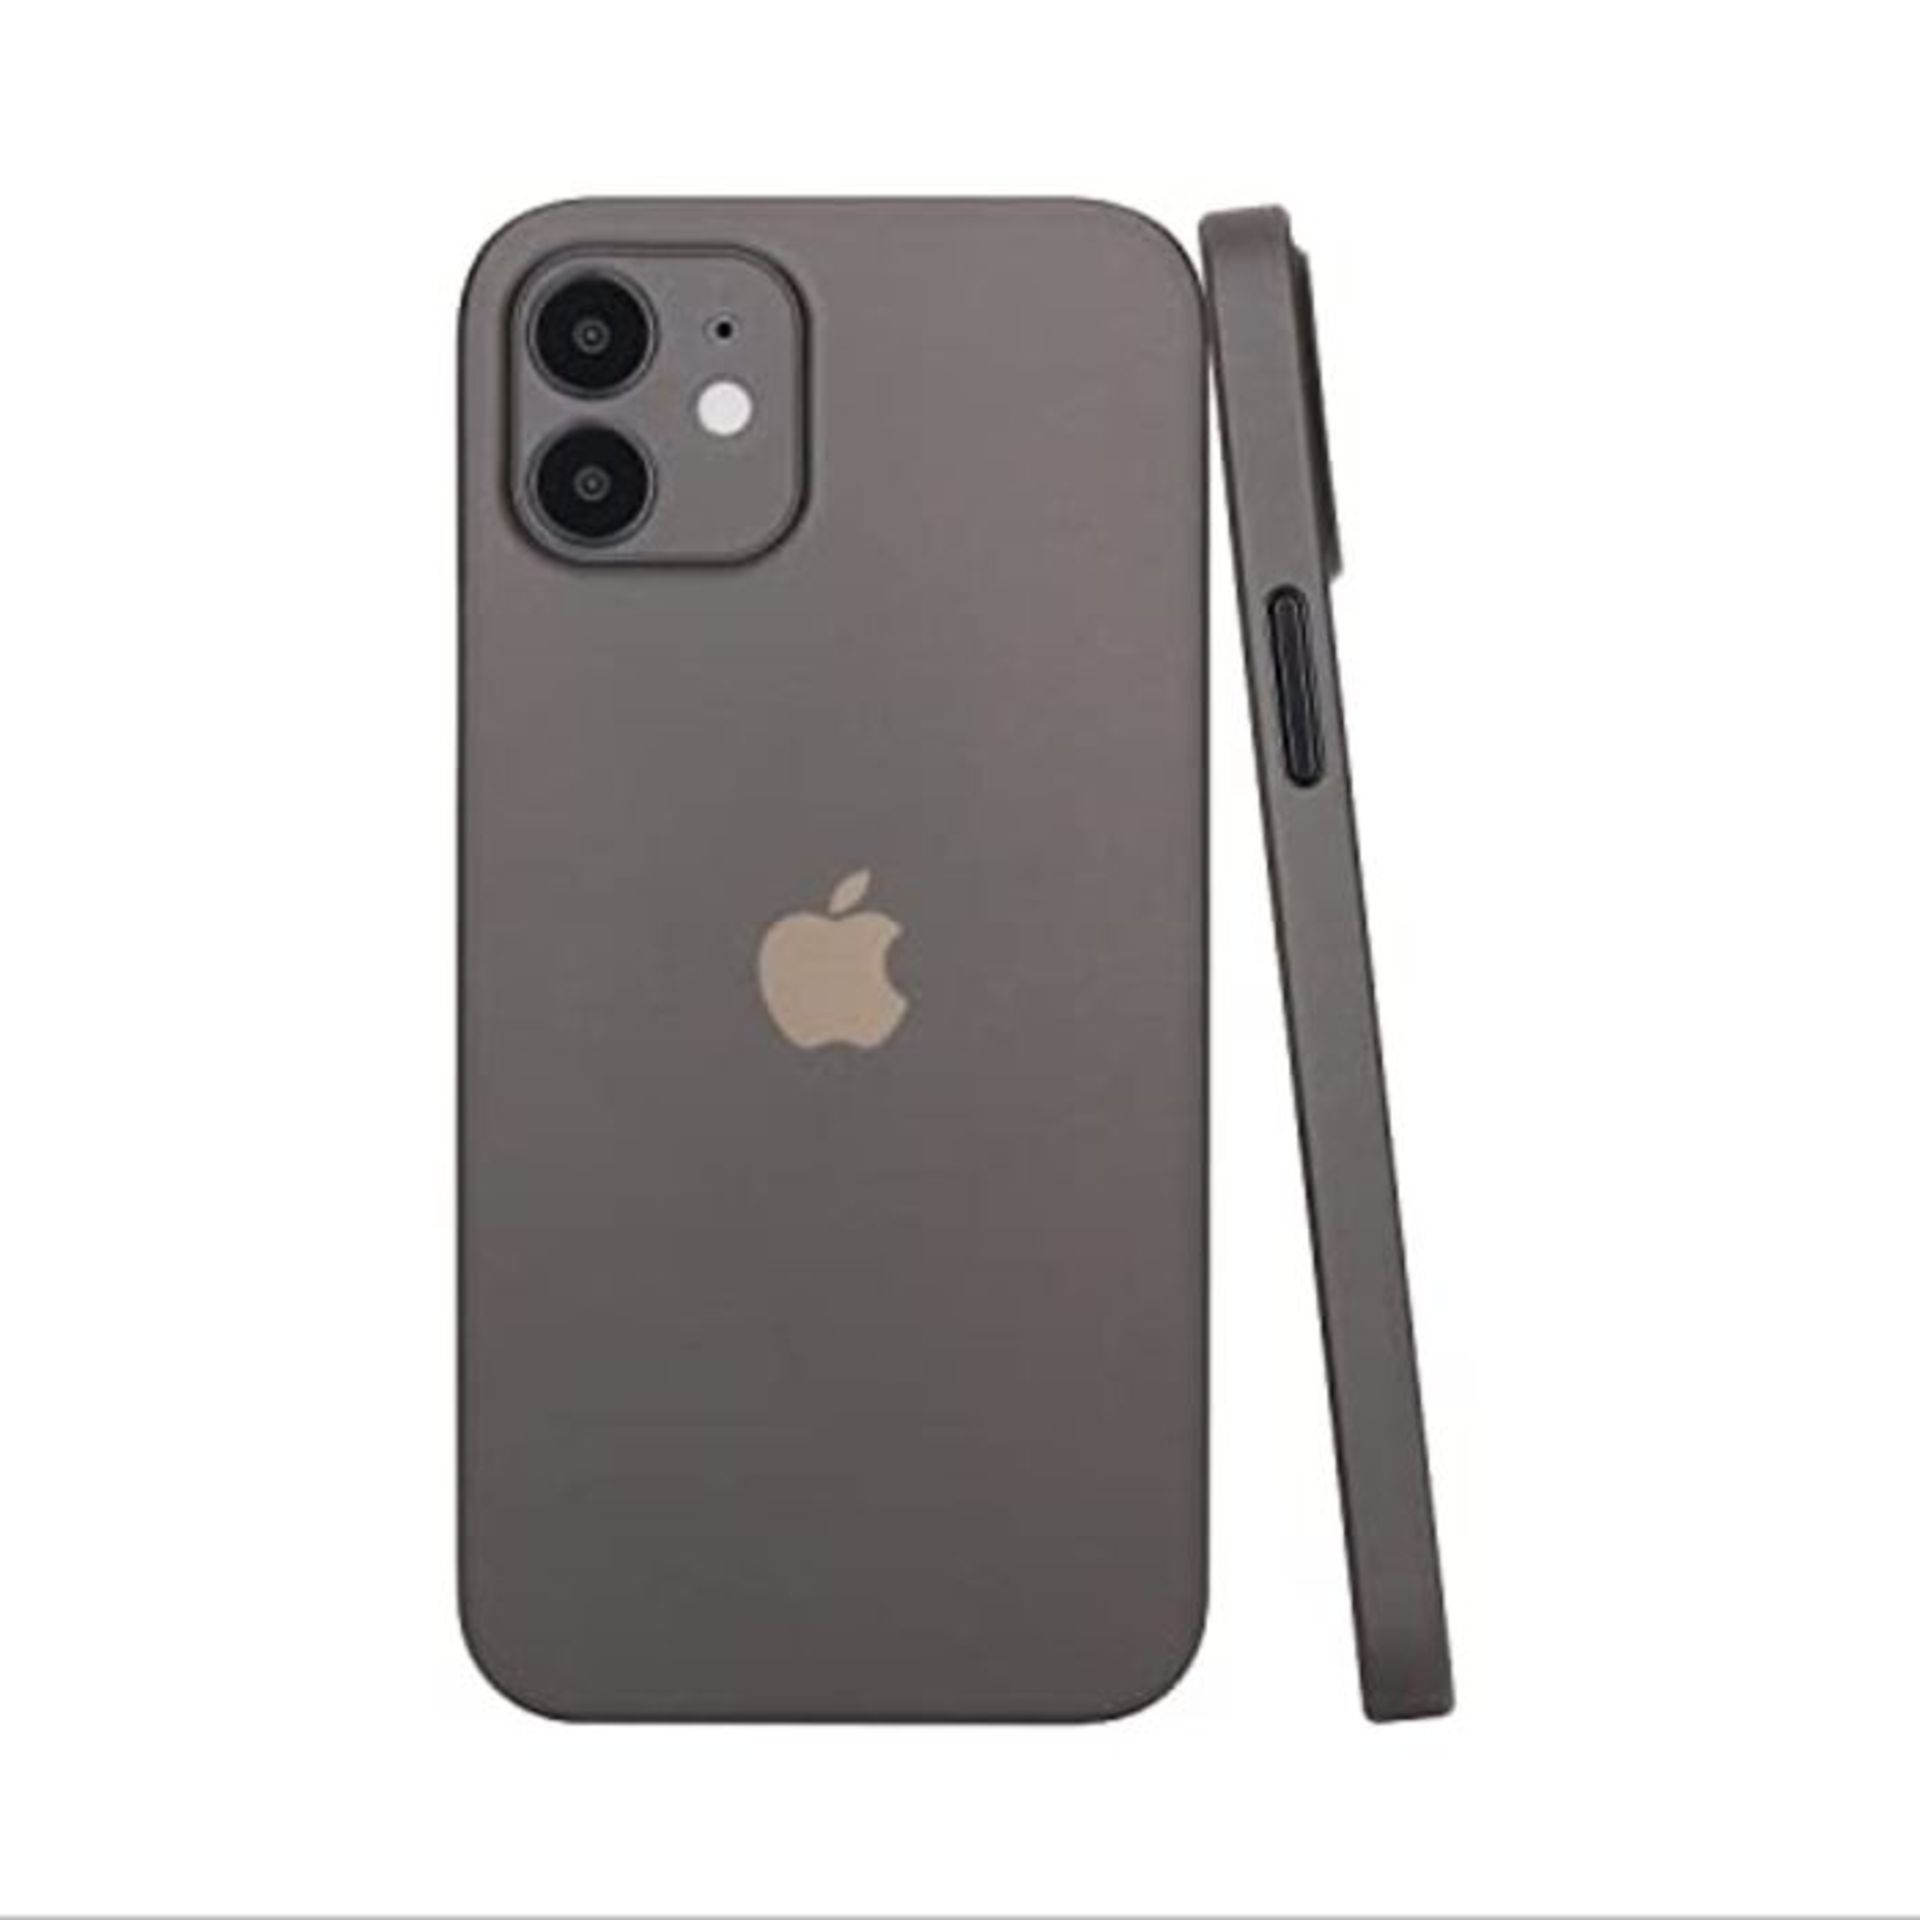 CELLBEE iPhone 12 Mini Case - Premium Slim Protective Case Compatible with iPhone, Ext